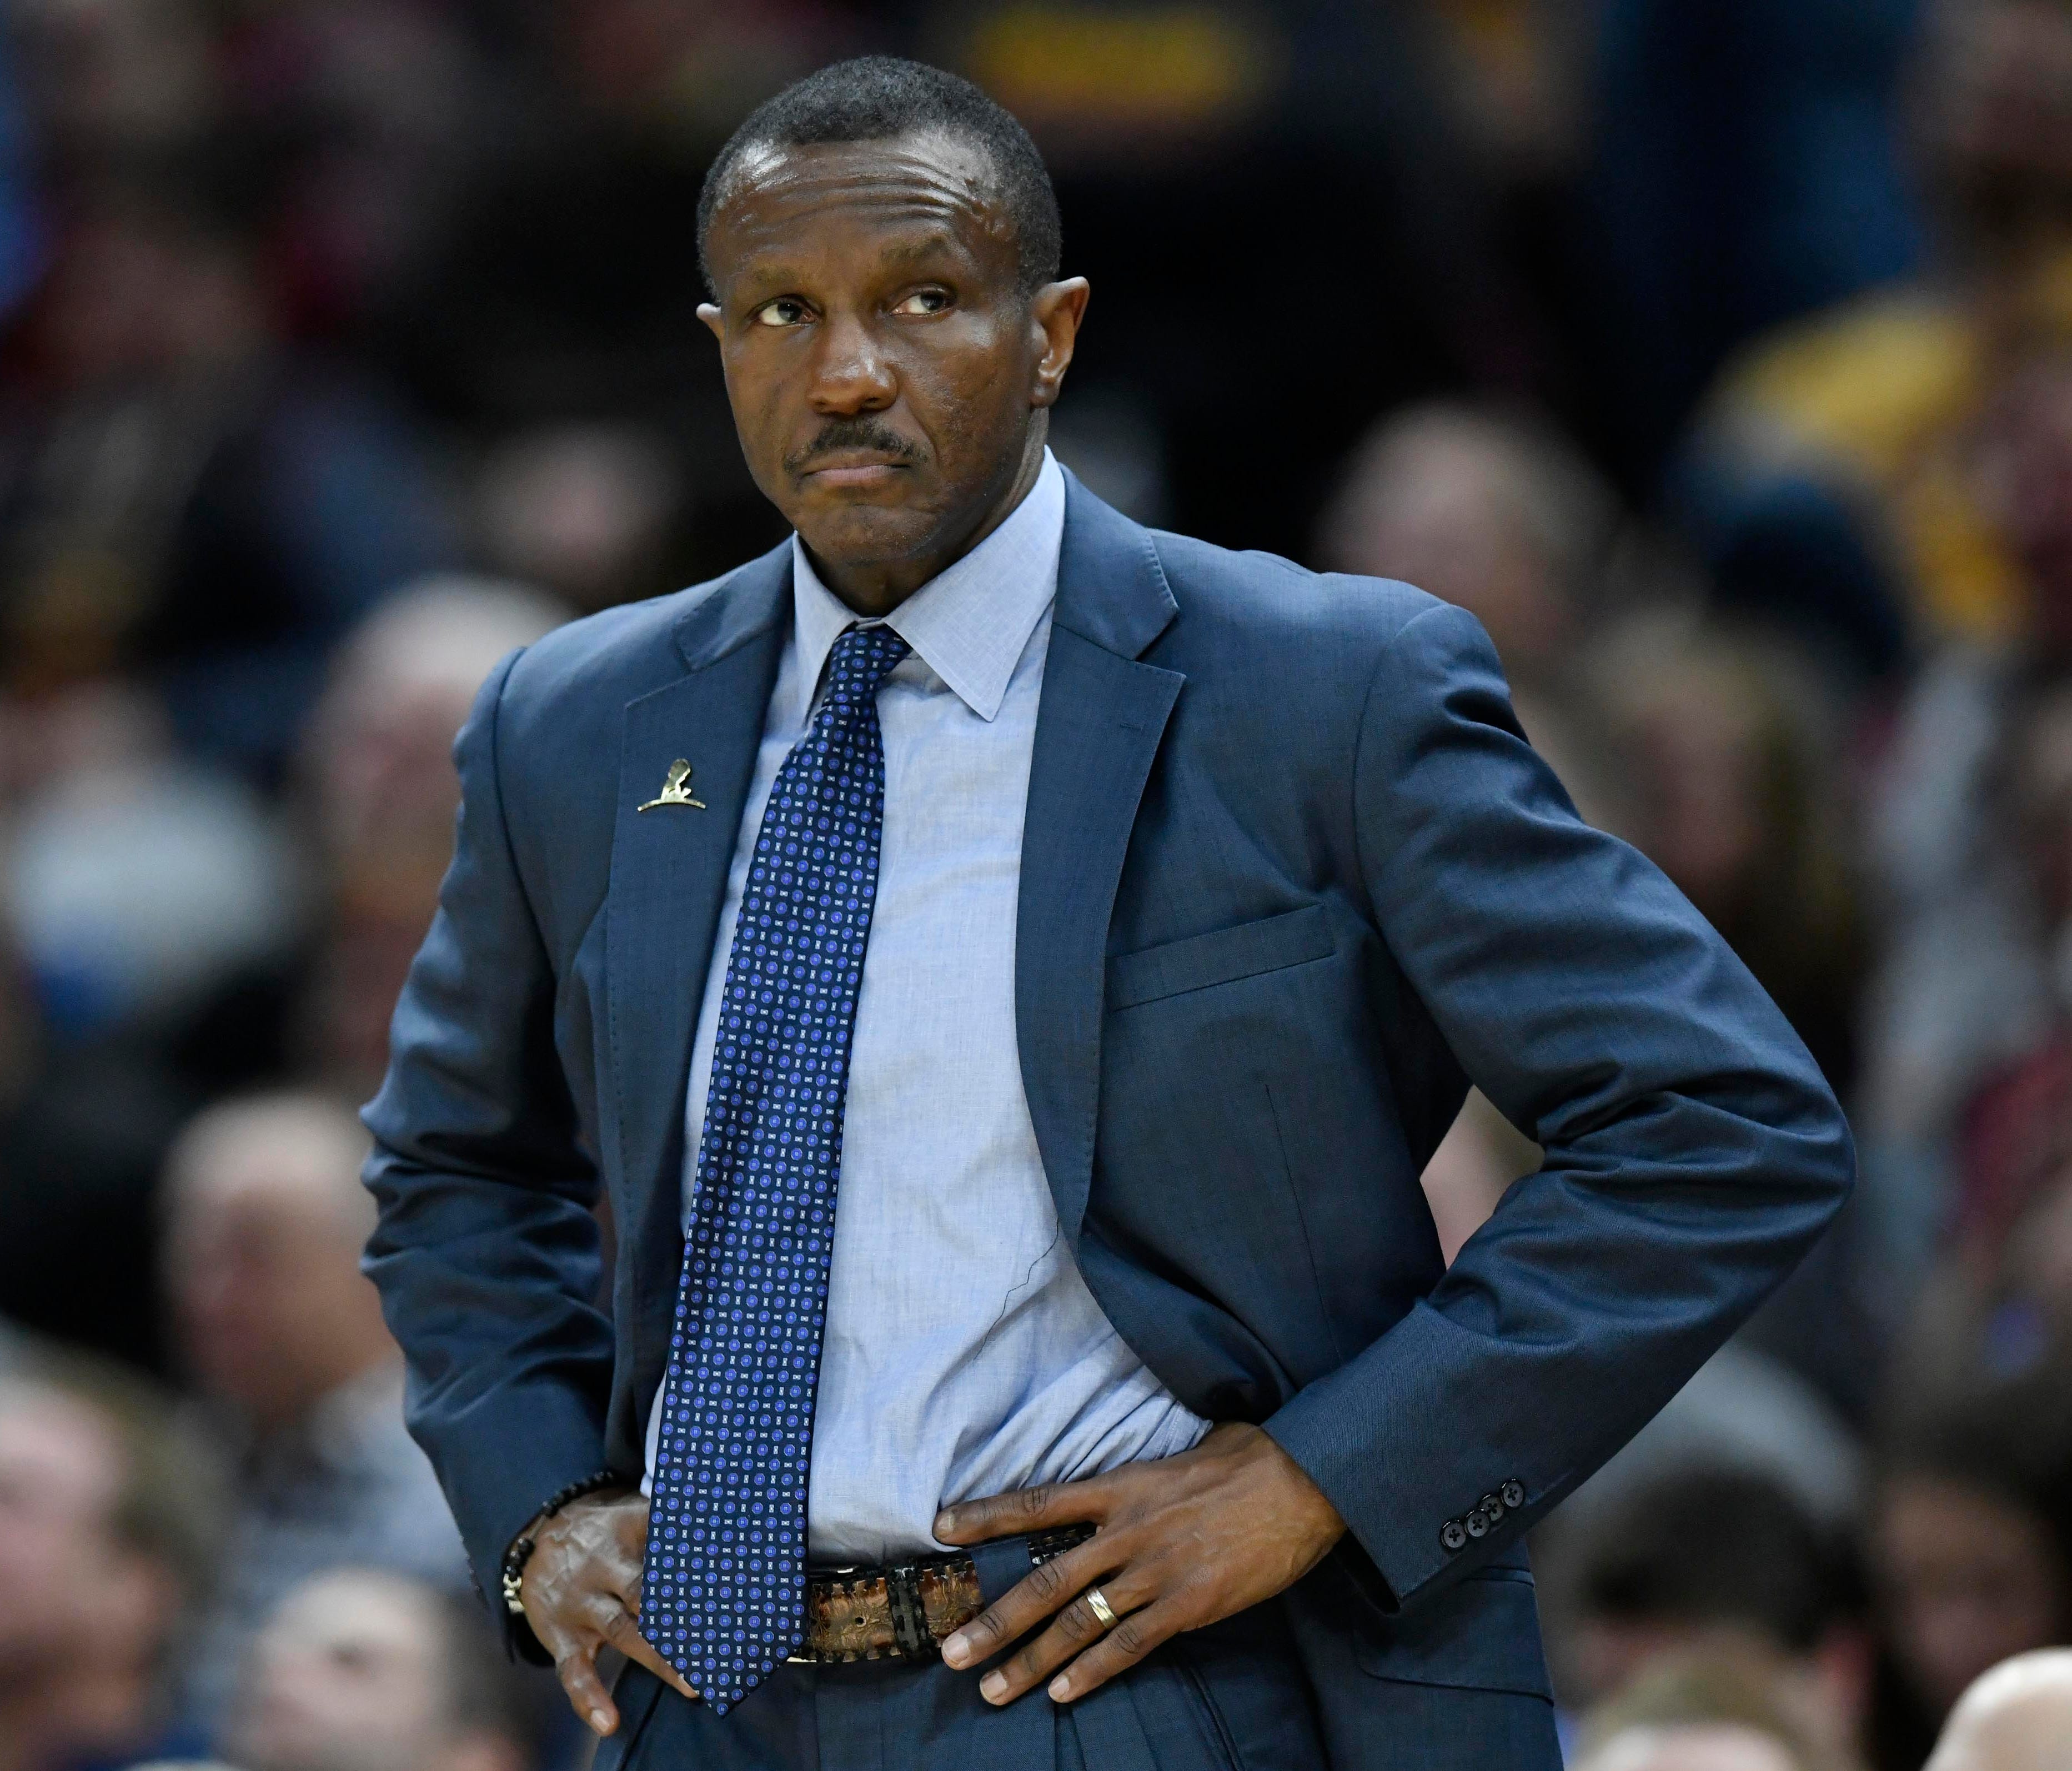 Toronto Raptors head coach Dwane Casey reacts in the third quarter against the Cleveland Cavaliers at Quicken Loans Arena.